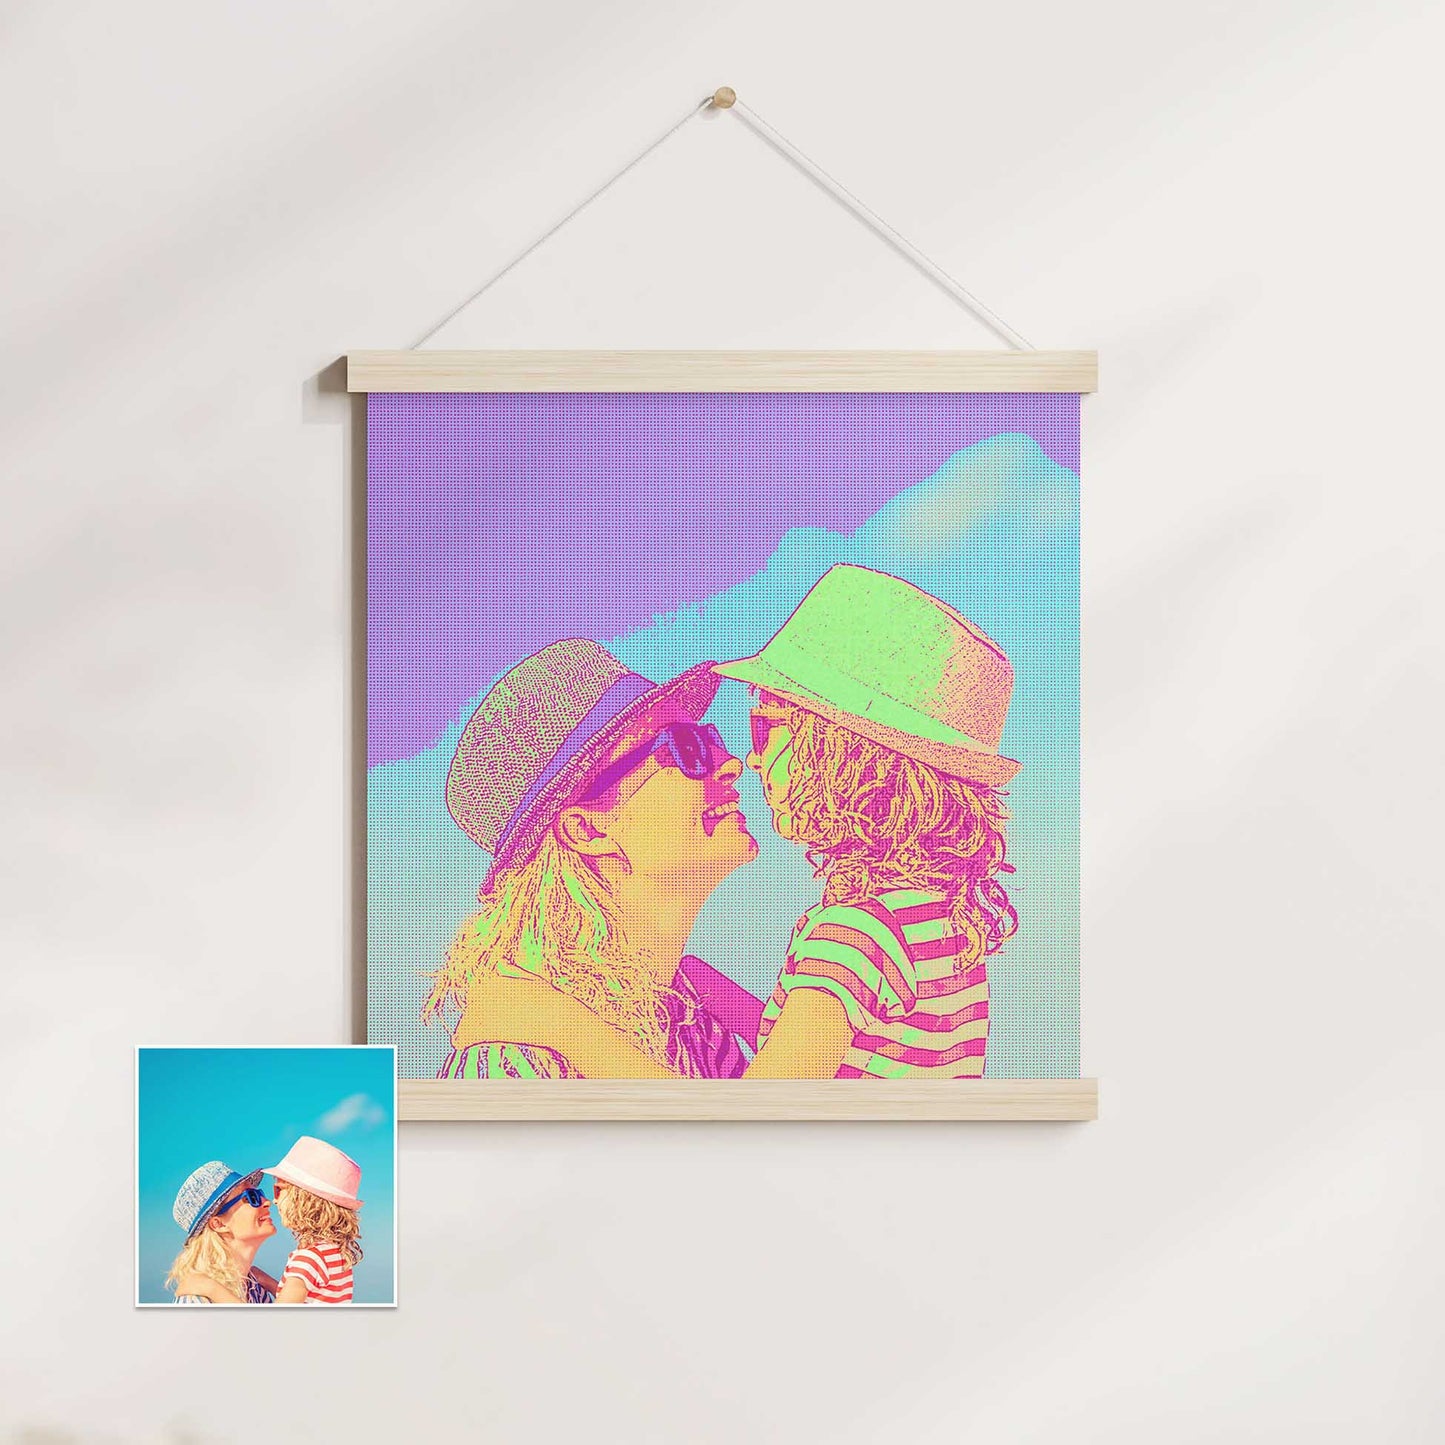 Experience the joy of our Personalised Green & Pink Pop Art Poster Hanger. With a cartoon-like effect created from your photo, it exudes a retro vibe with a halftone texture. The vibrant colors of green, pink, blue, and purple 